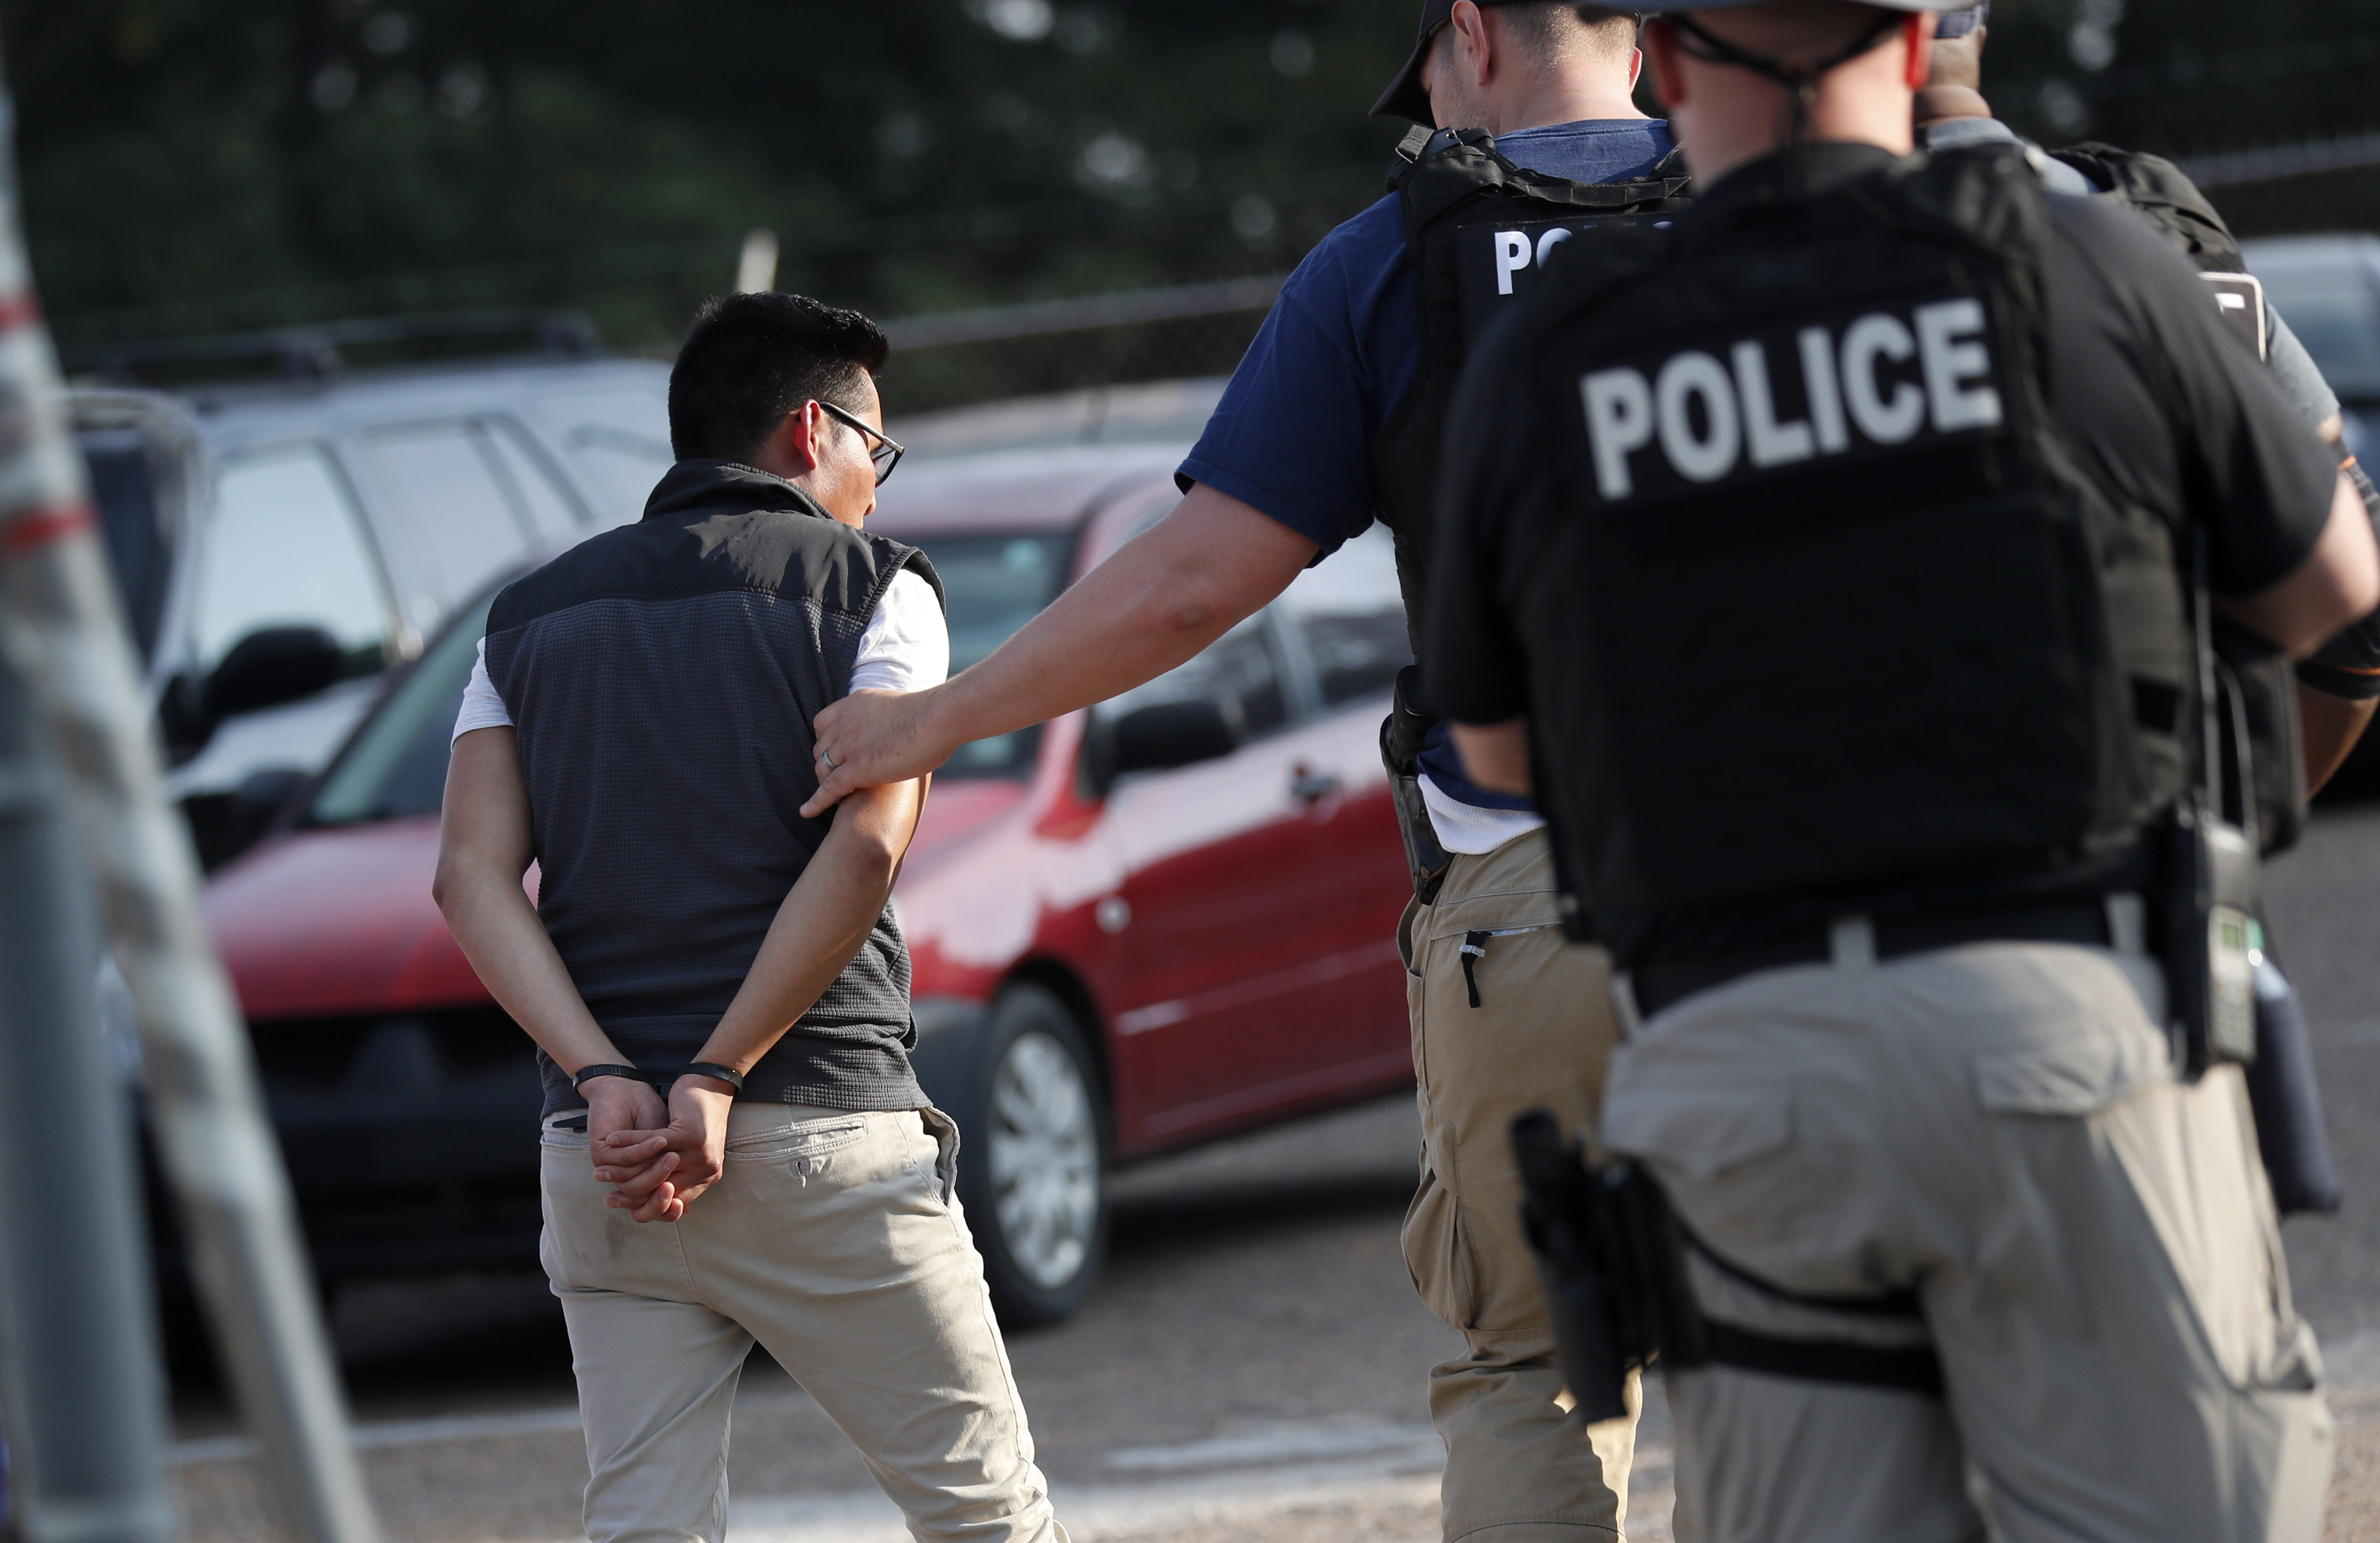 A man is taken into custody at a Koch Foods Inc. plant in Morton, Miss., on August 7, 2019. (Rogelio V. Solis&mdash;AP)